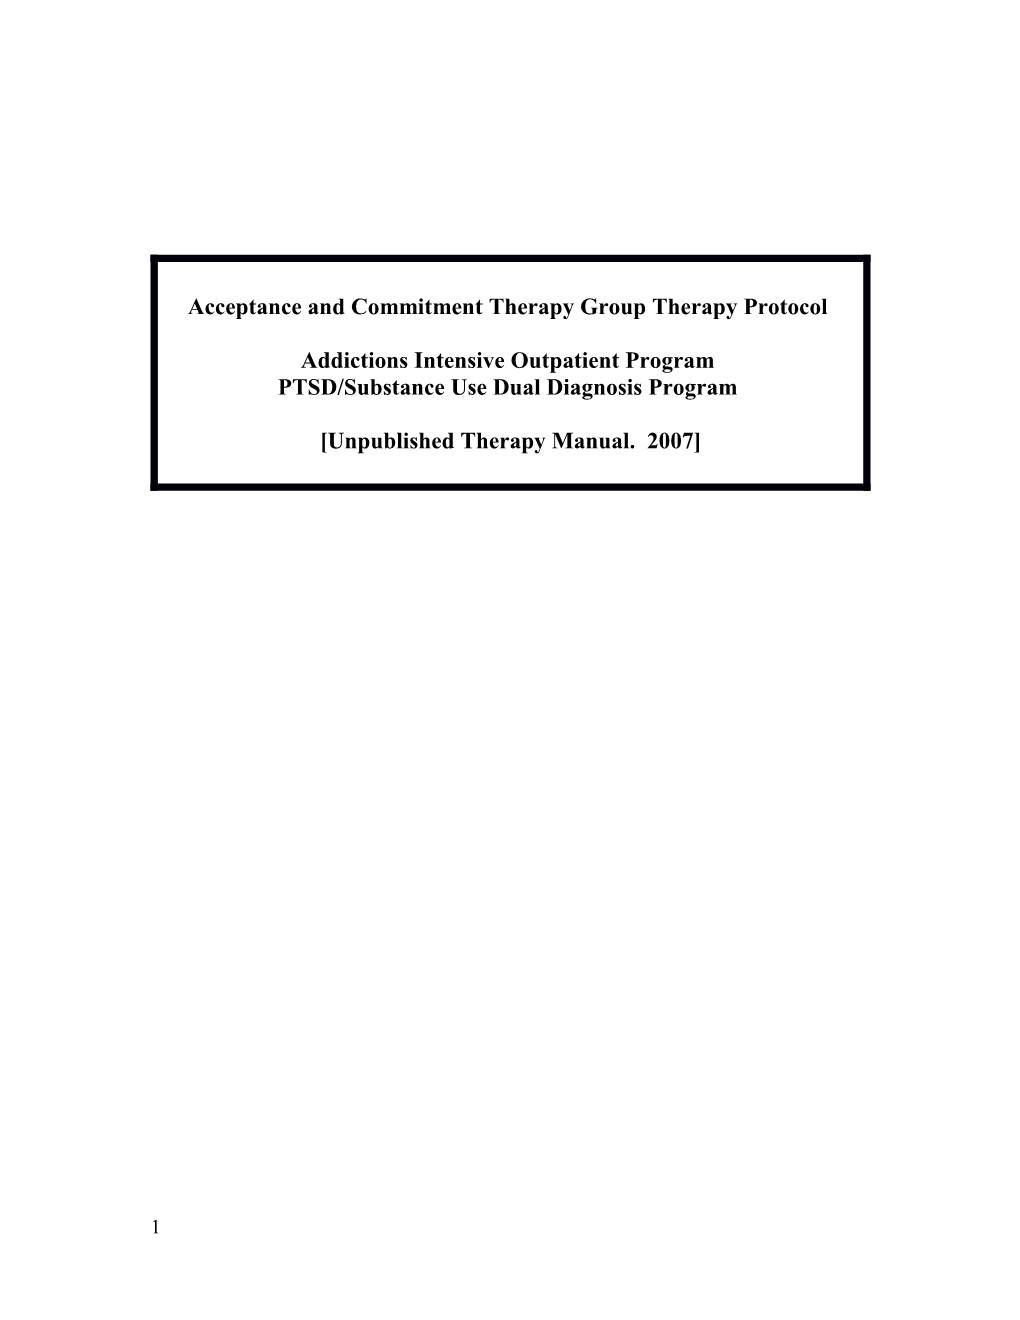 Acceptance and Commitment Therapy Group Therapy Protocol for the Addictions Intensive Outpatient